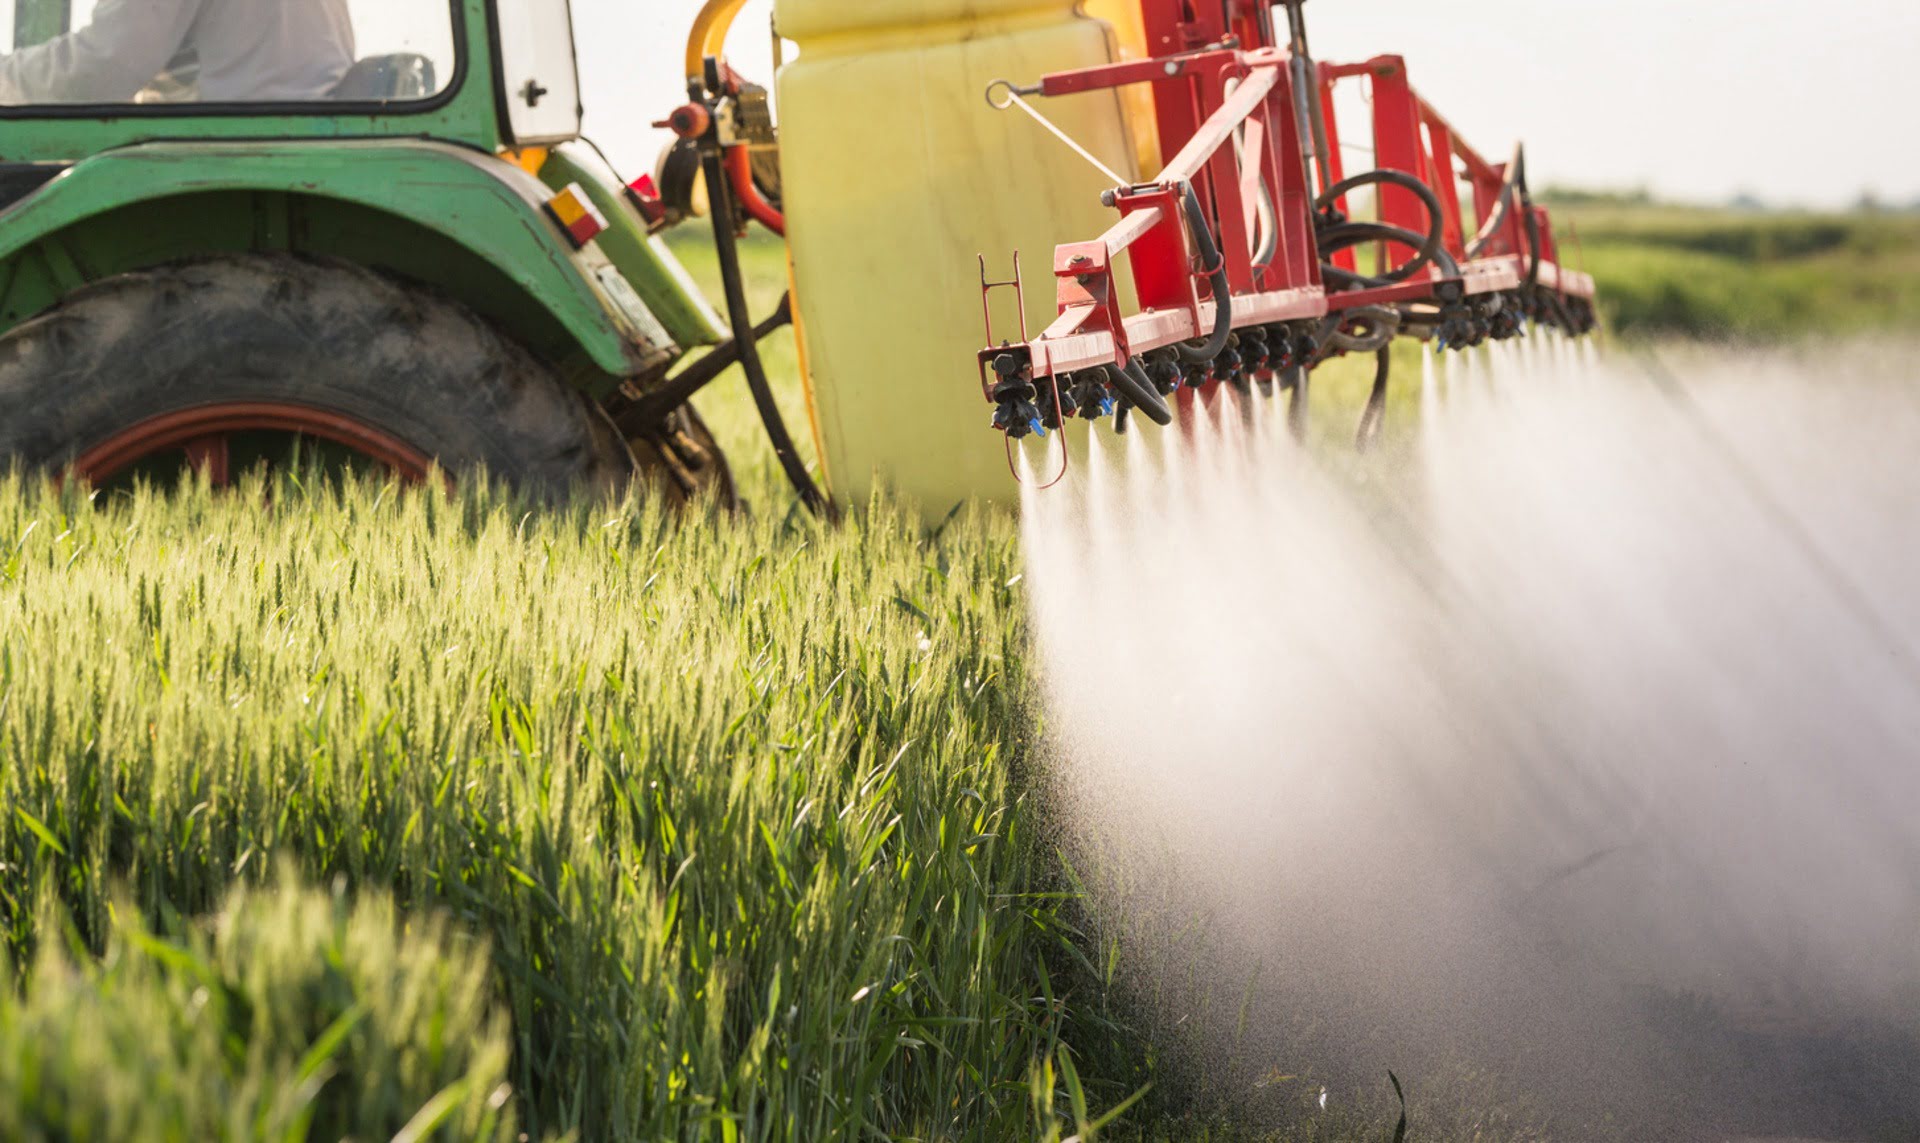 How Does Pesticides Increase Crop Yield